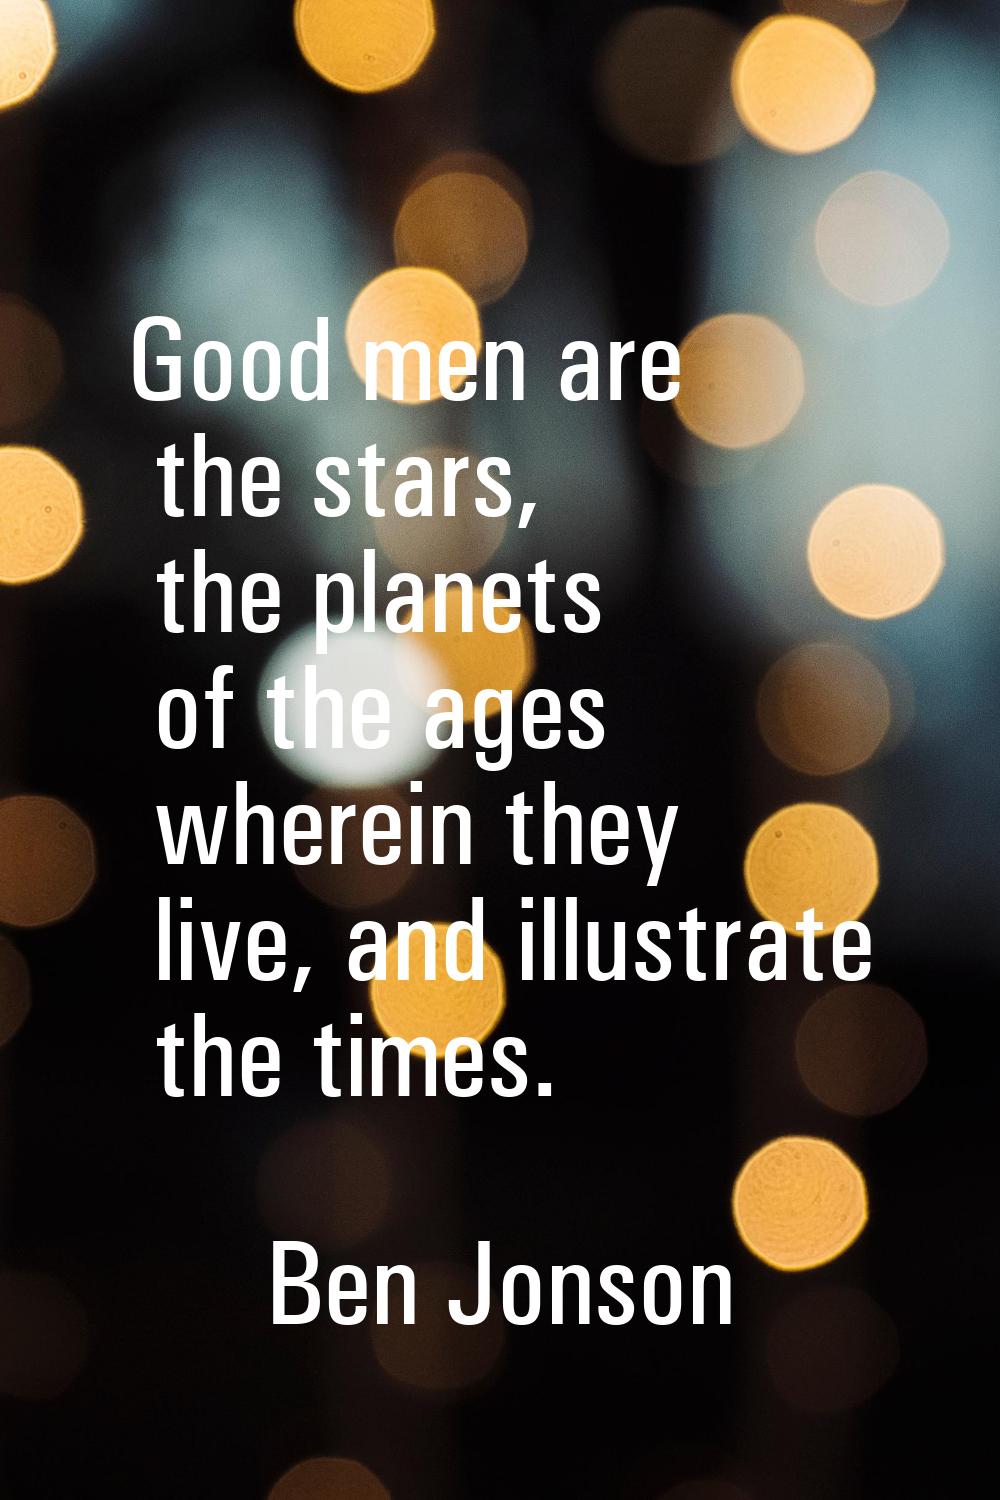 Good men are the stars, the planets of the ages wherein they live, and illustrate the times.